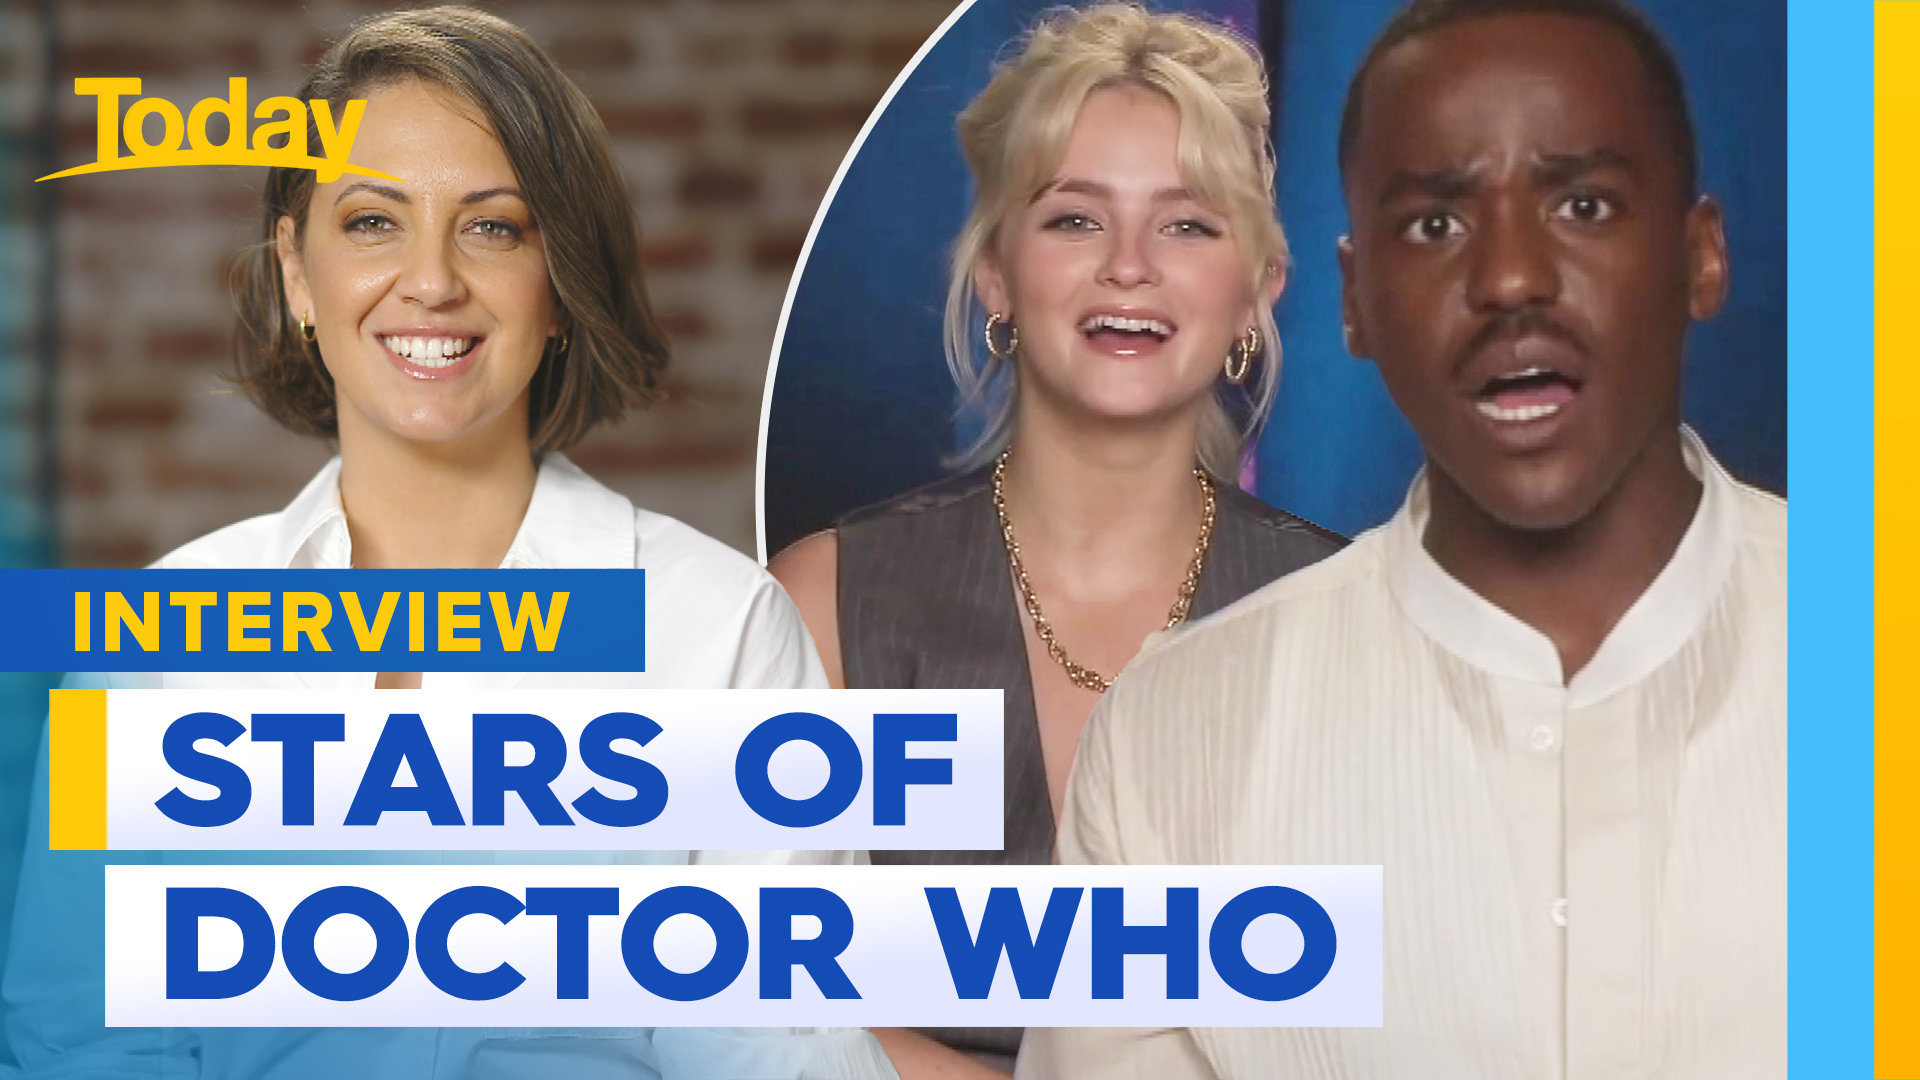 Doctor Who stars catch up with Today